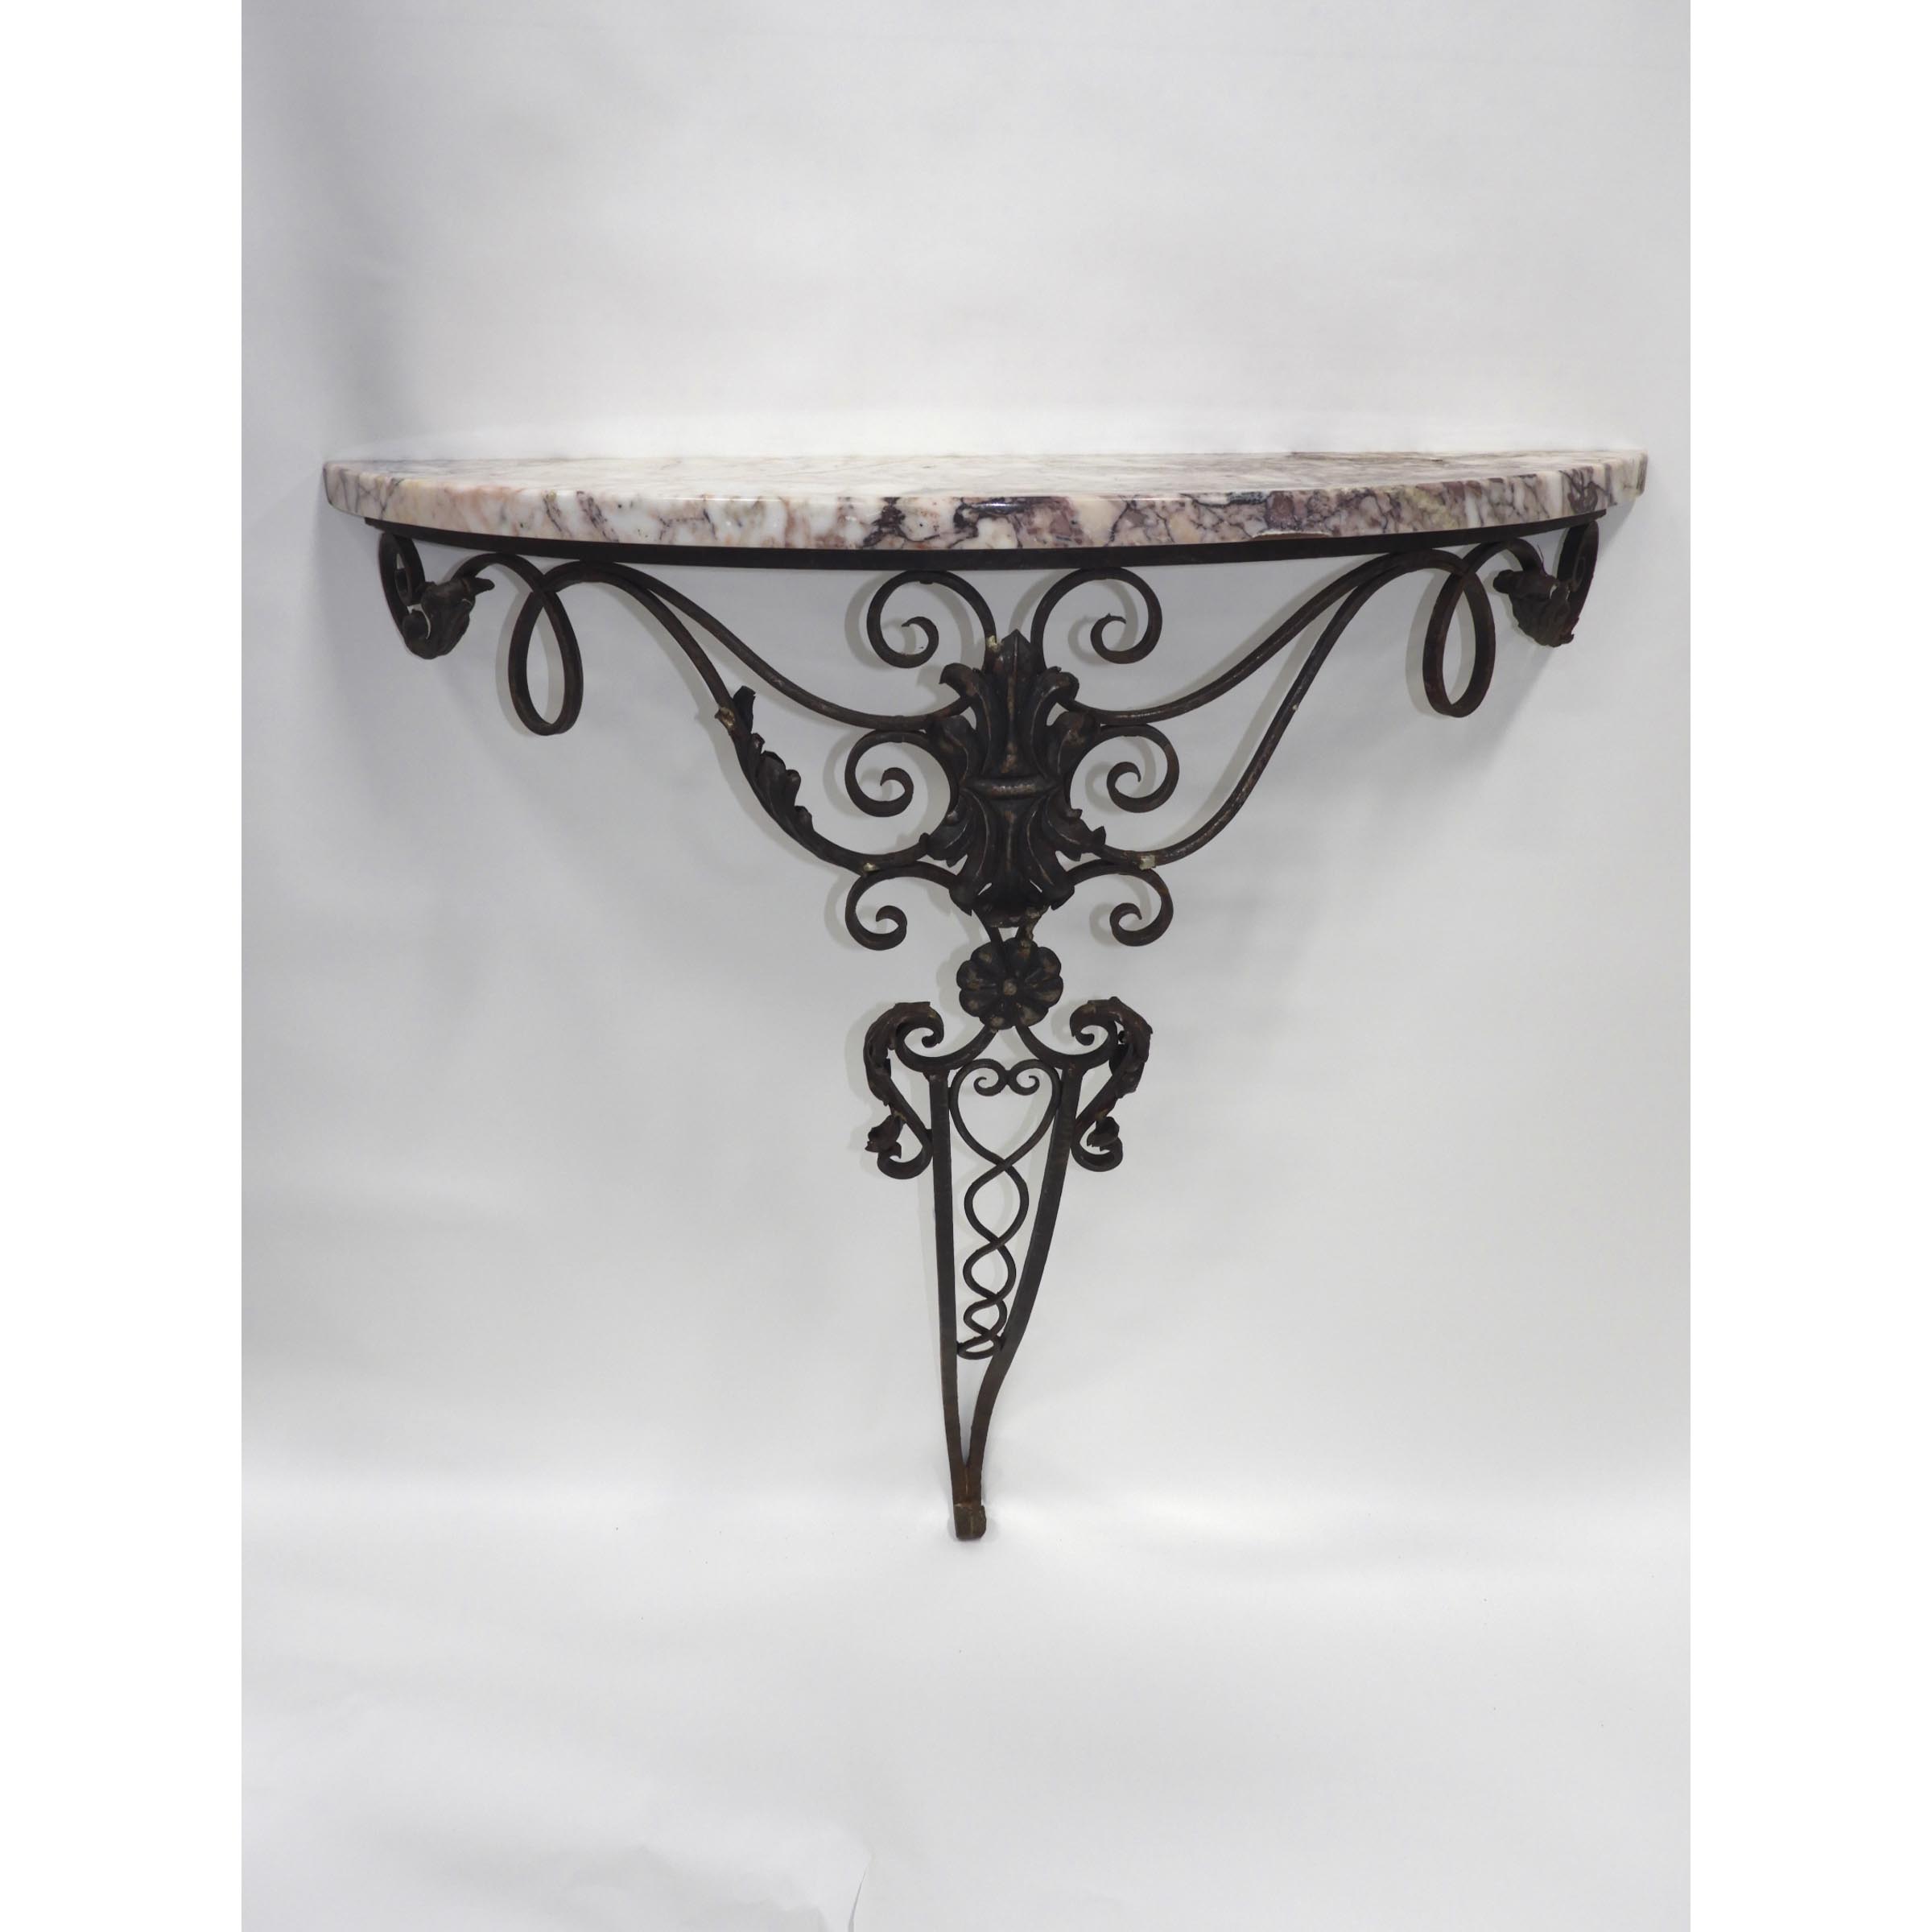 Spanish Wrought Iron Demilune Console Table, early 20th century